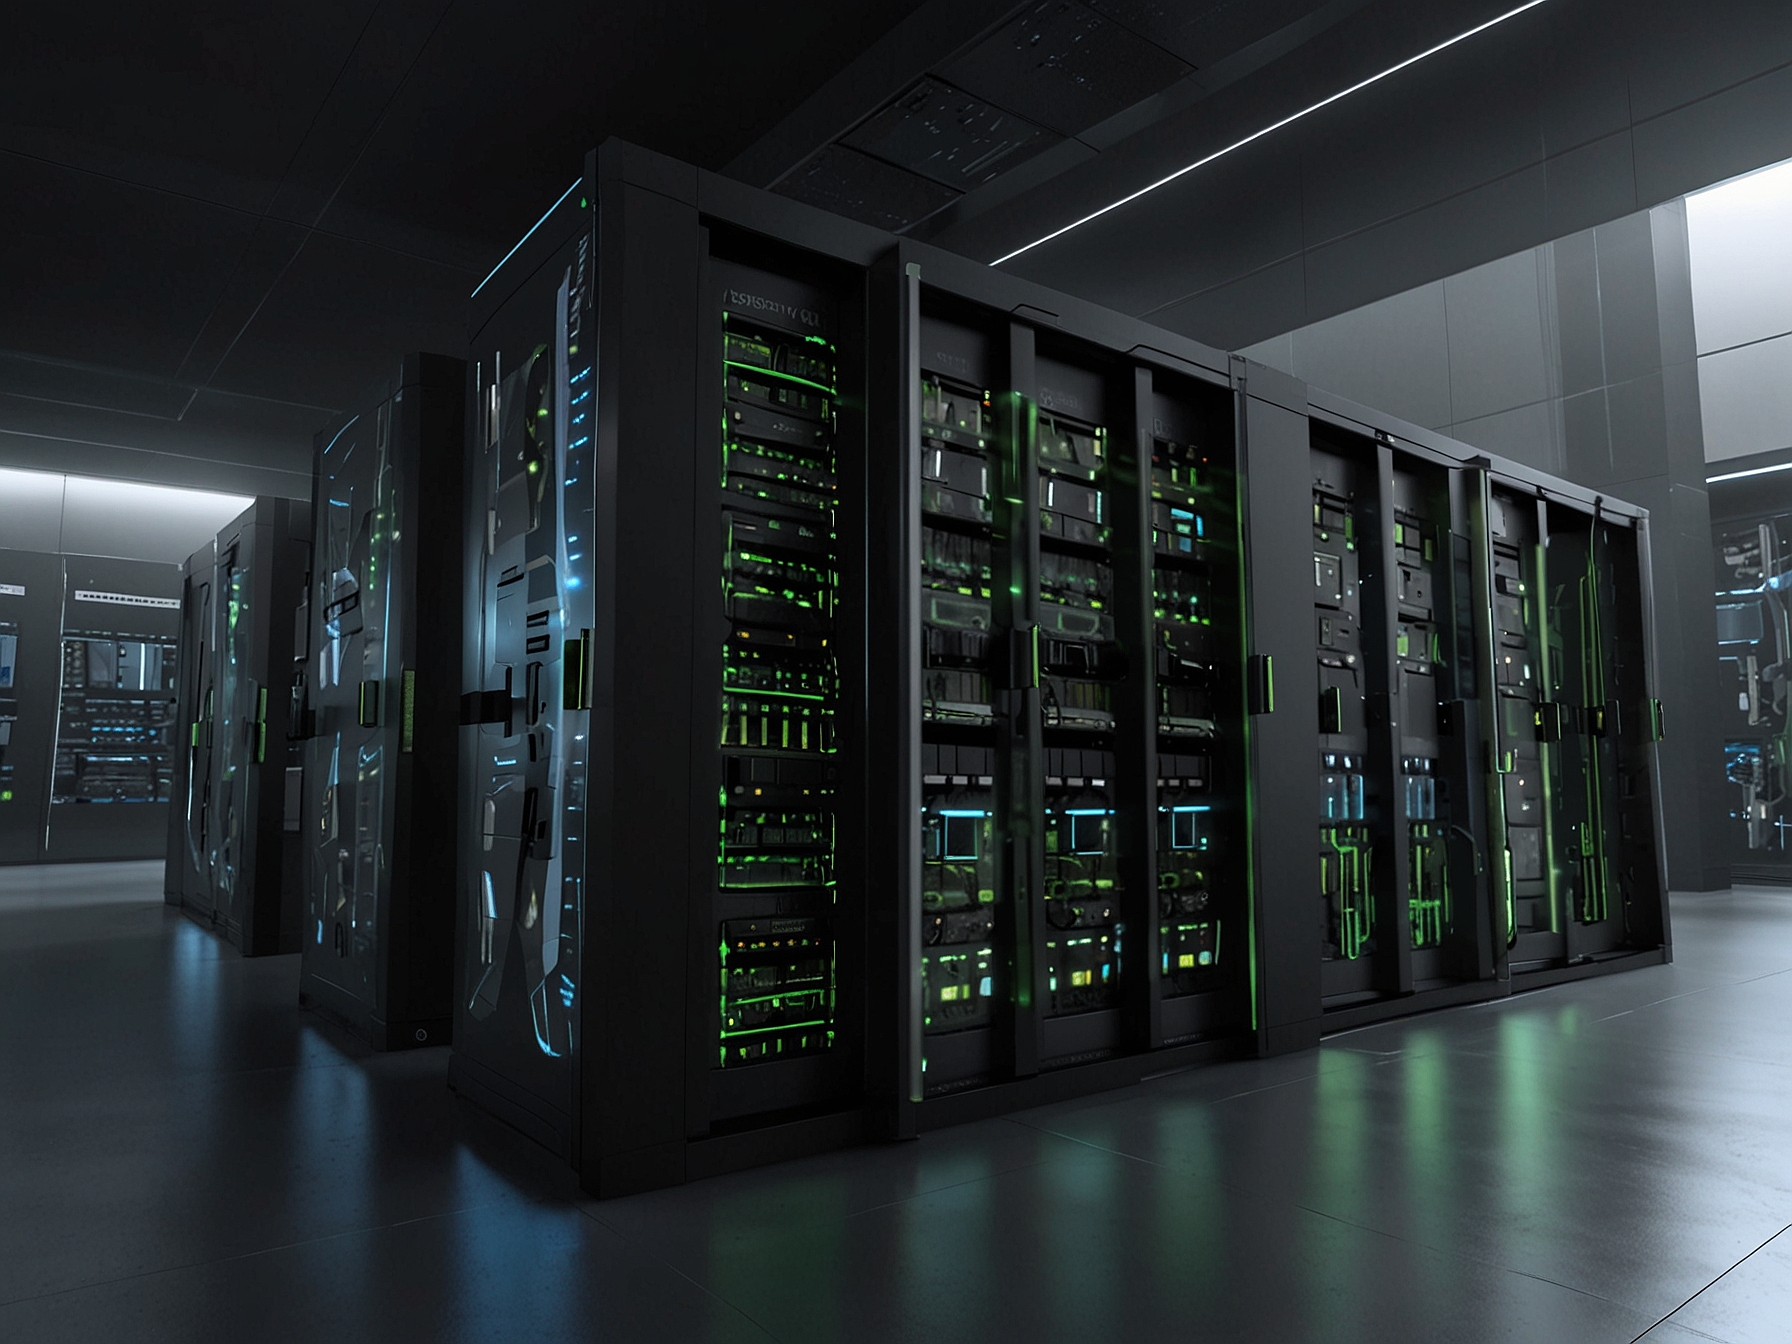 A futuristic data center with NVIDIA GPUs, showcasing the powerful hardware relied upon by AI professionals for high-performance computing and AI workloads.